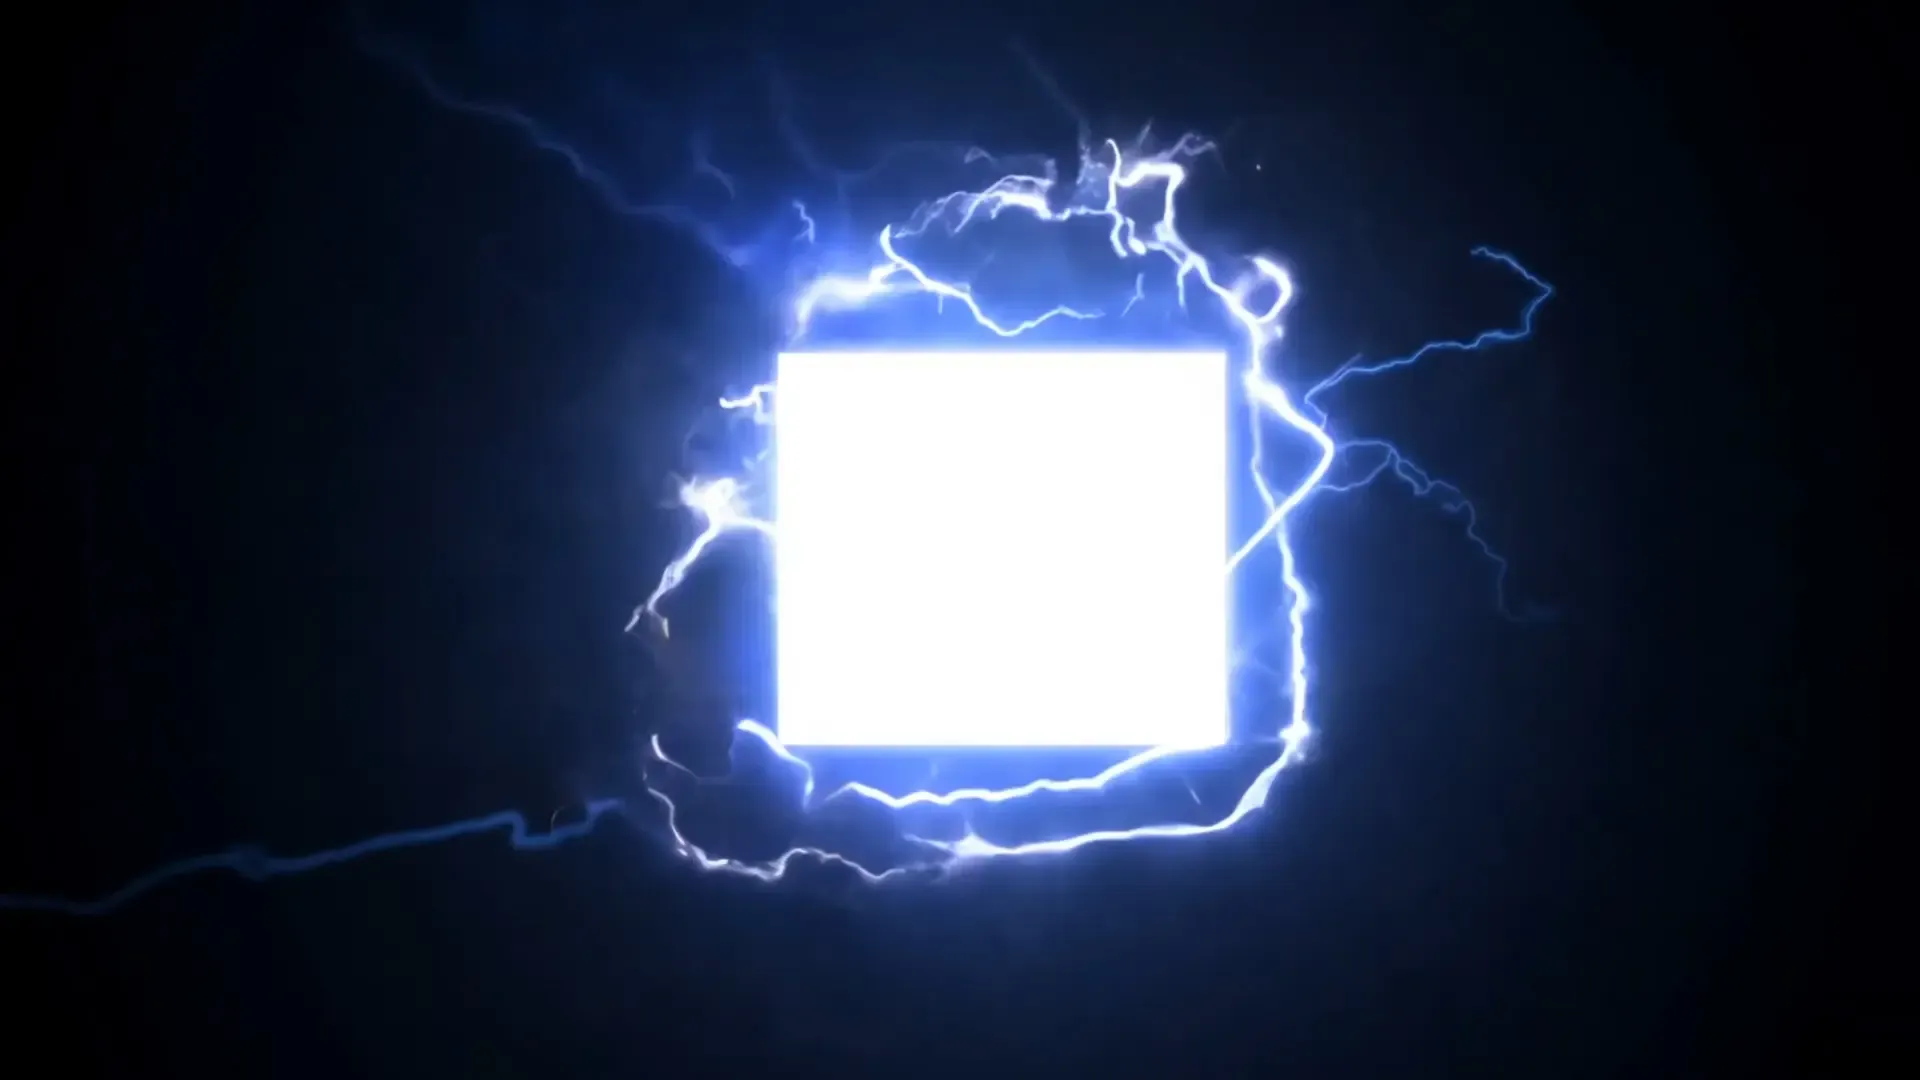 Powerful Electric Pulse Background for Logo Reveals